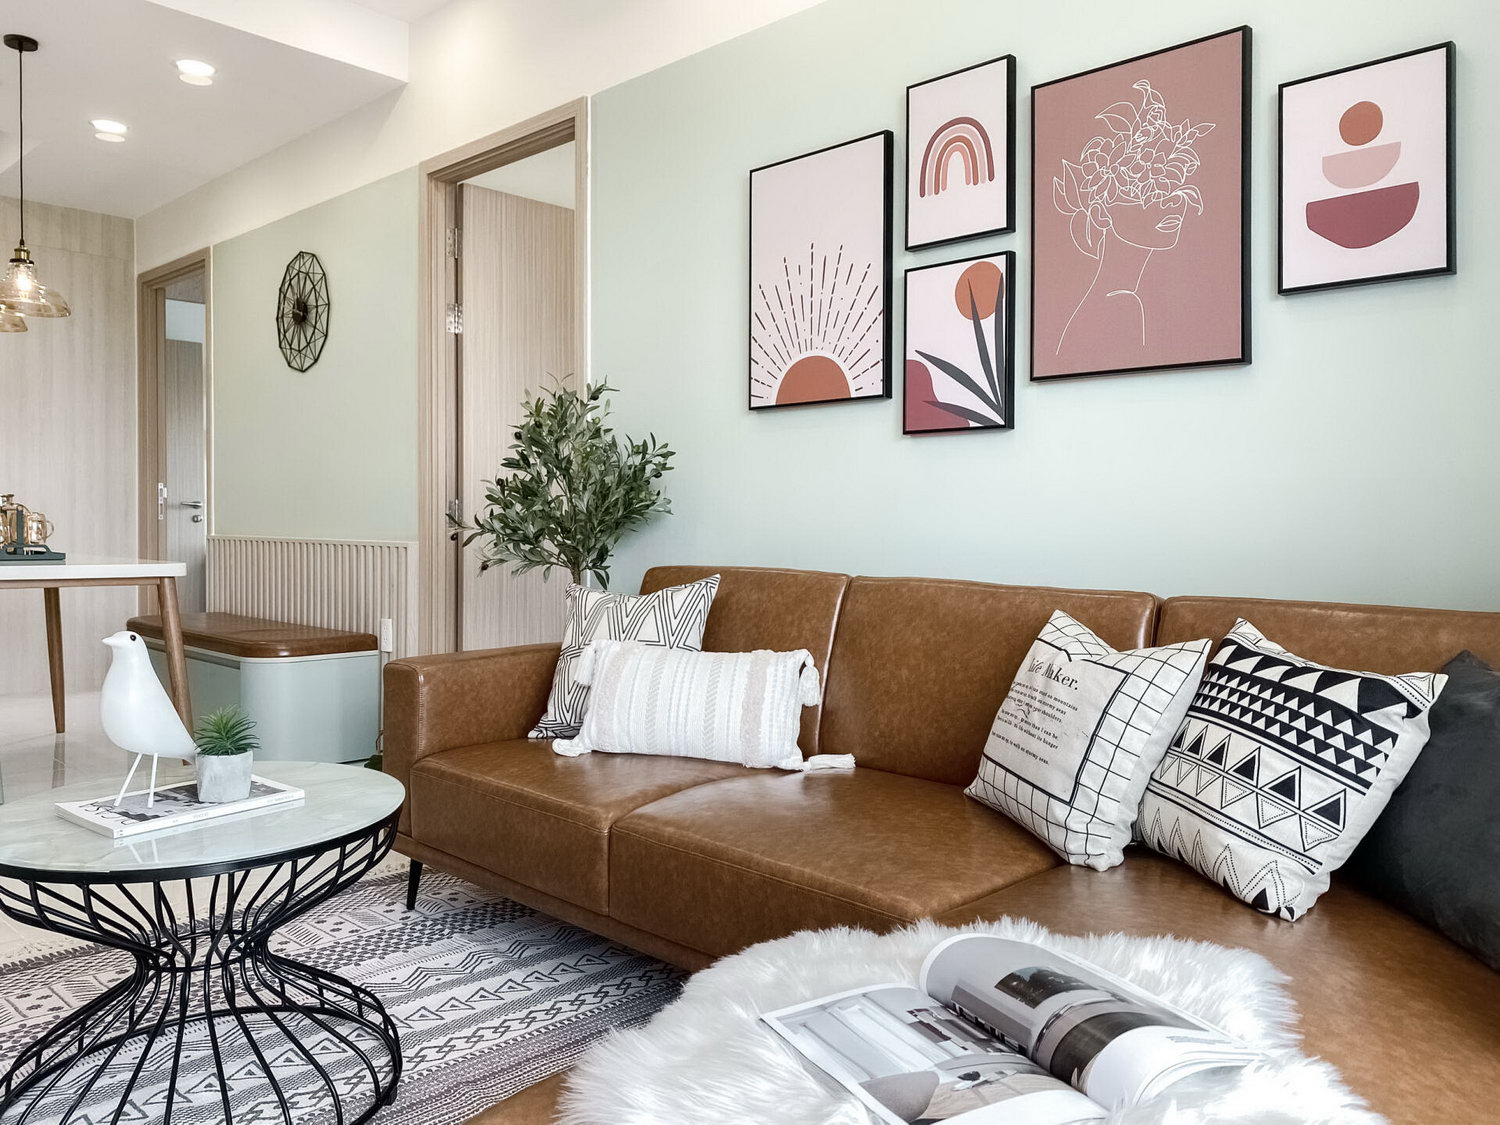 Art paintings add color to the living room.